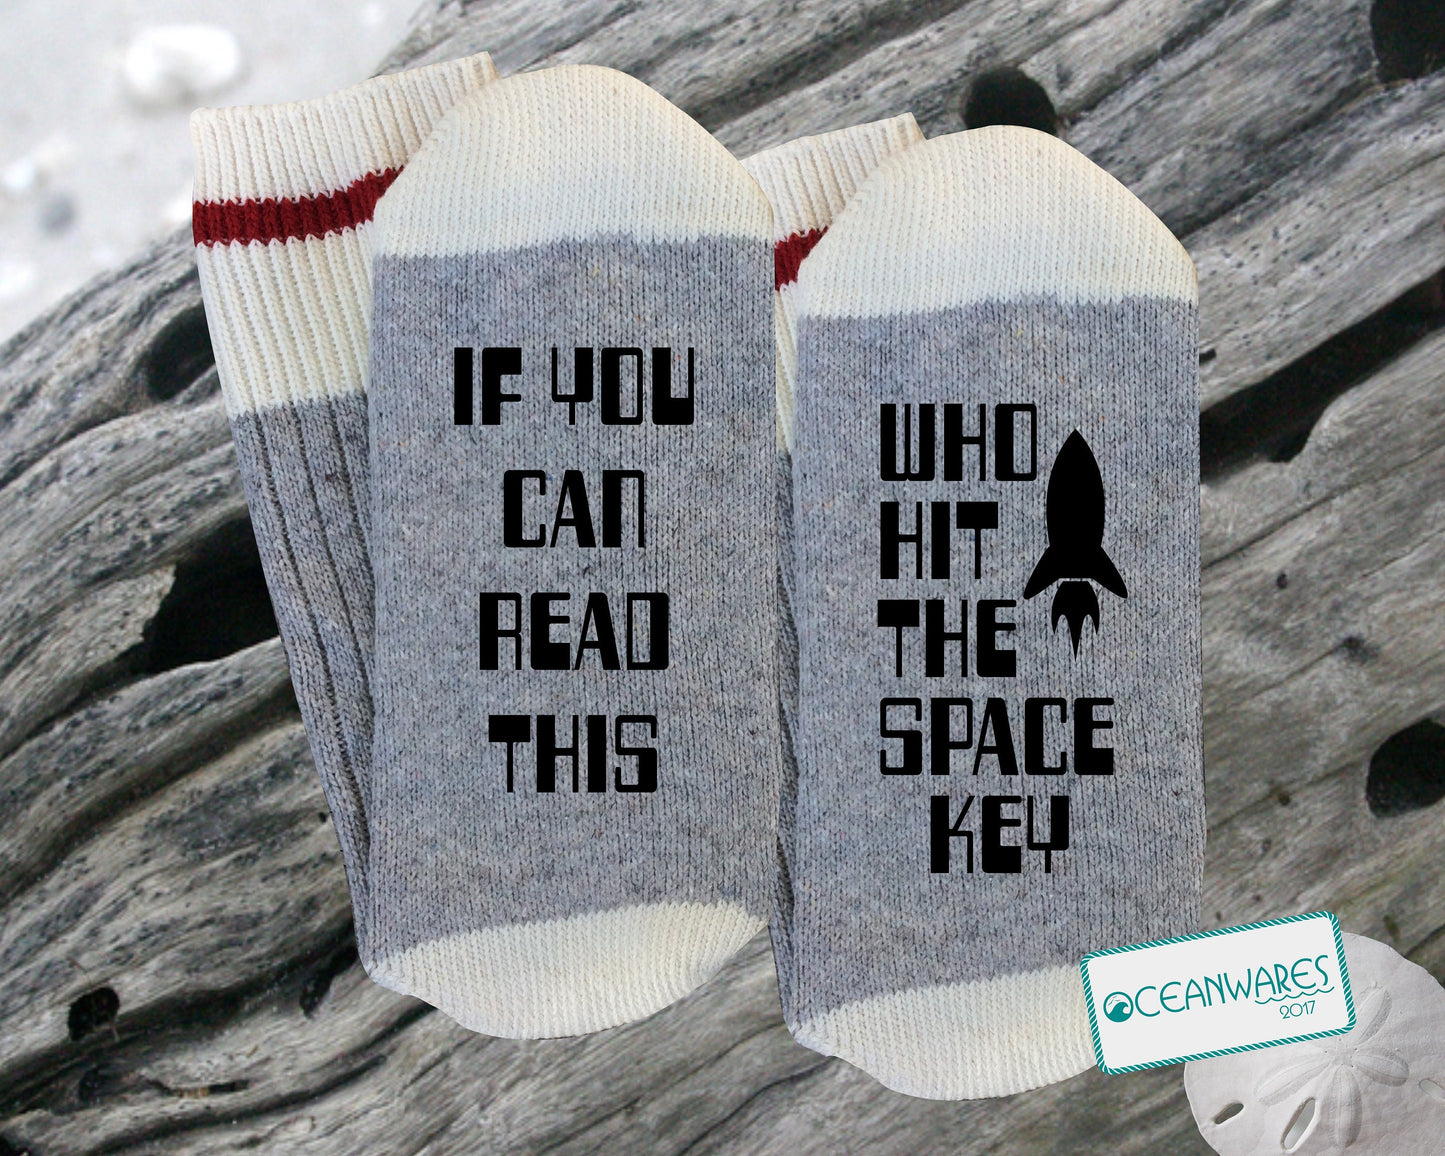 Who Hit The Space Key, SUPER SOFT NOVELTY WORD SOCKS.